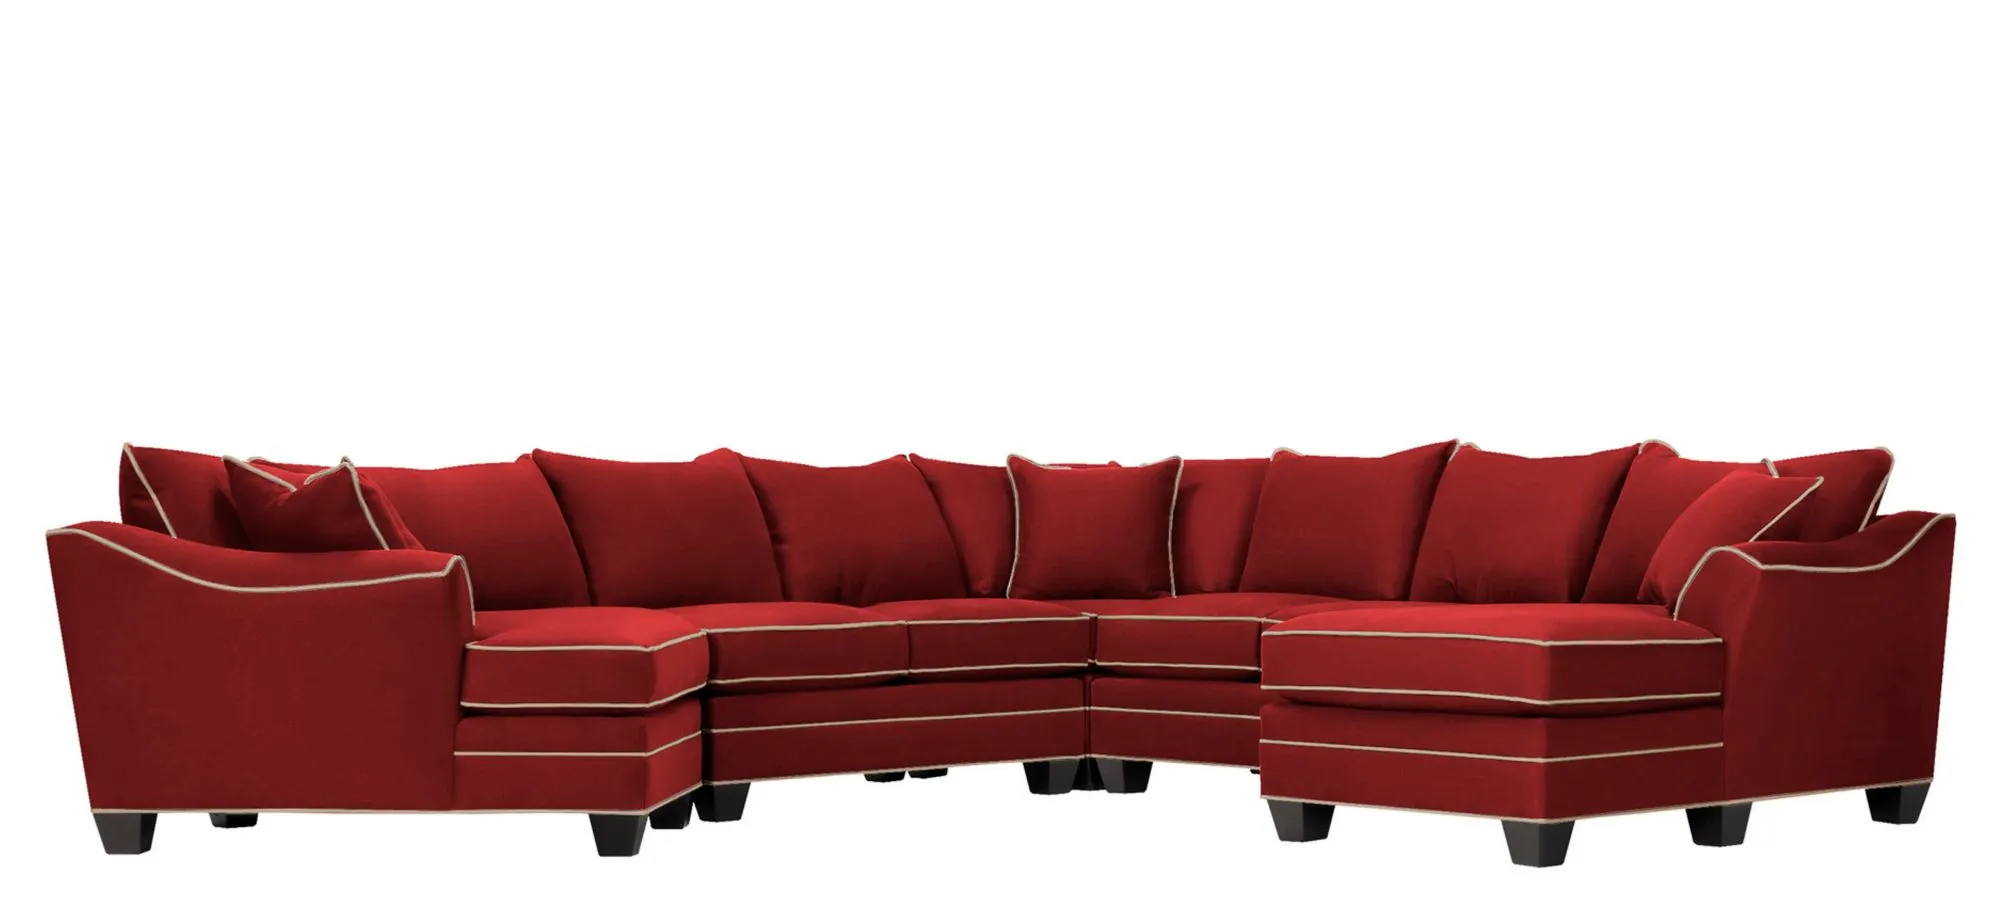 Foresthill 5-pc. Right Hand Facing Sectional Sofa in Suede So Soft Cardinal/Mineral by H.M. Richards